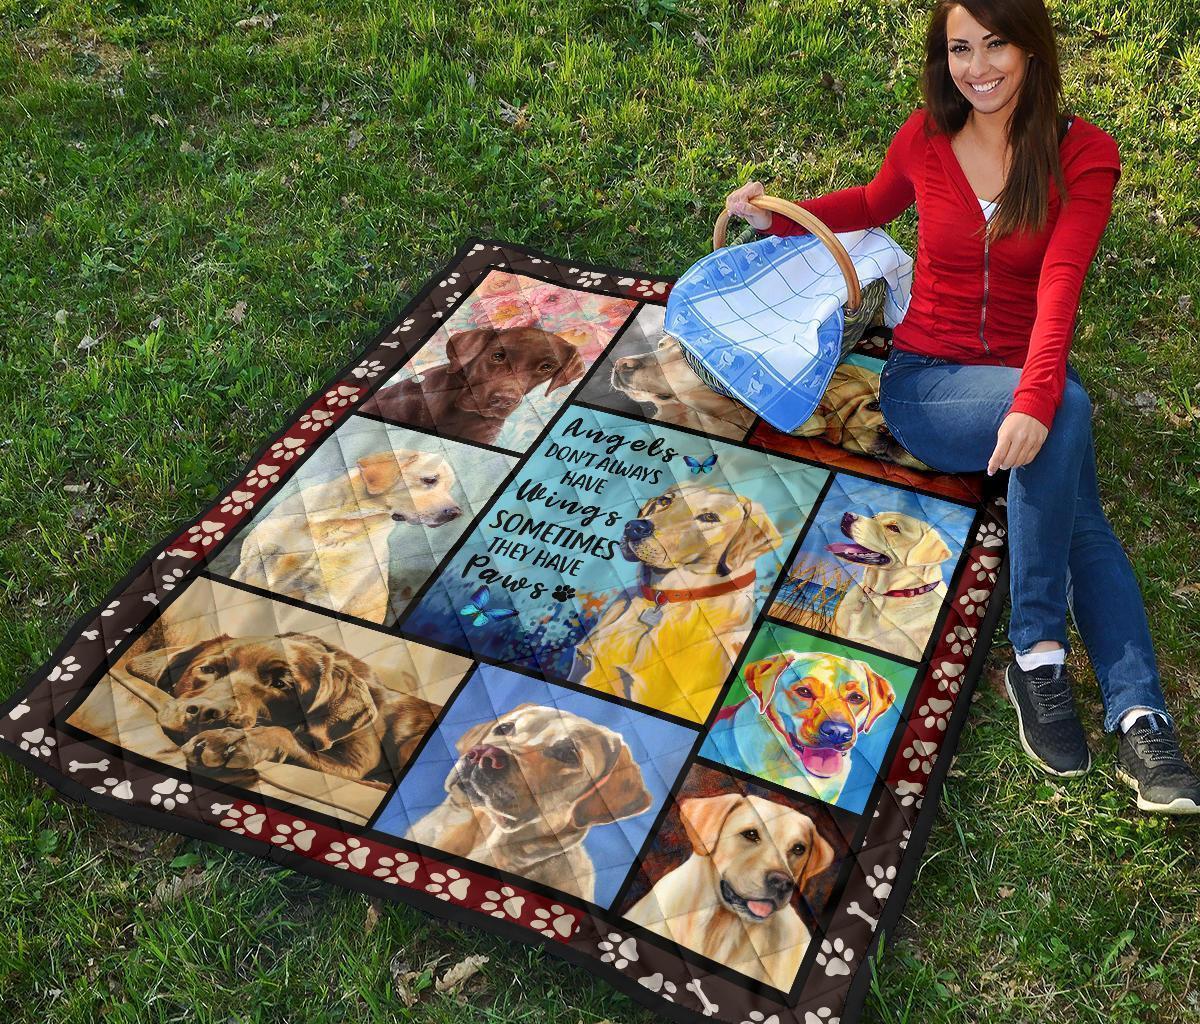 Labrador Dog Quilt Blanket Angels Sometimes Have Paws-Gear Wanta